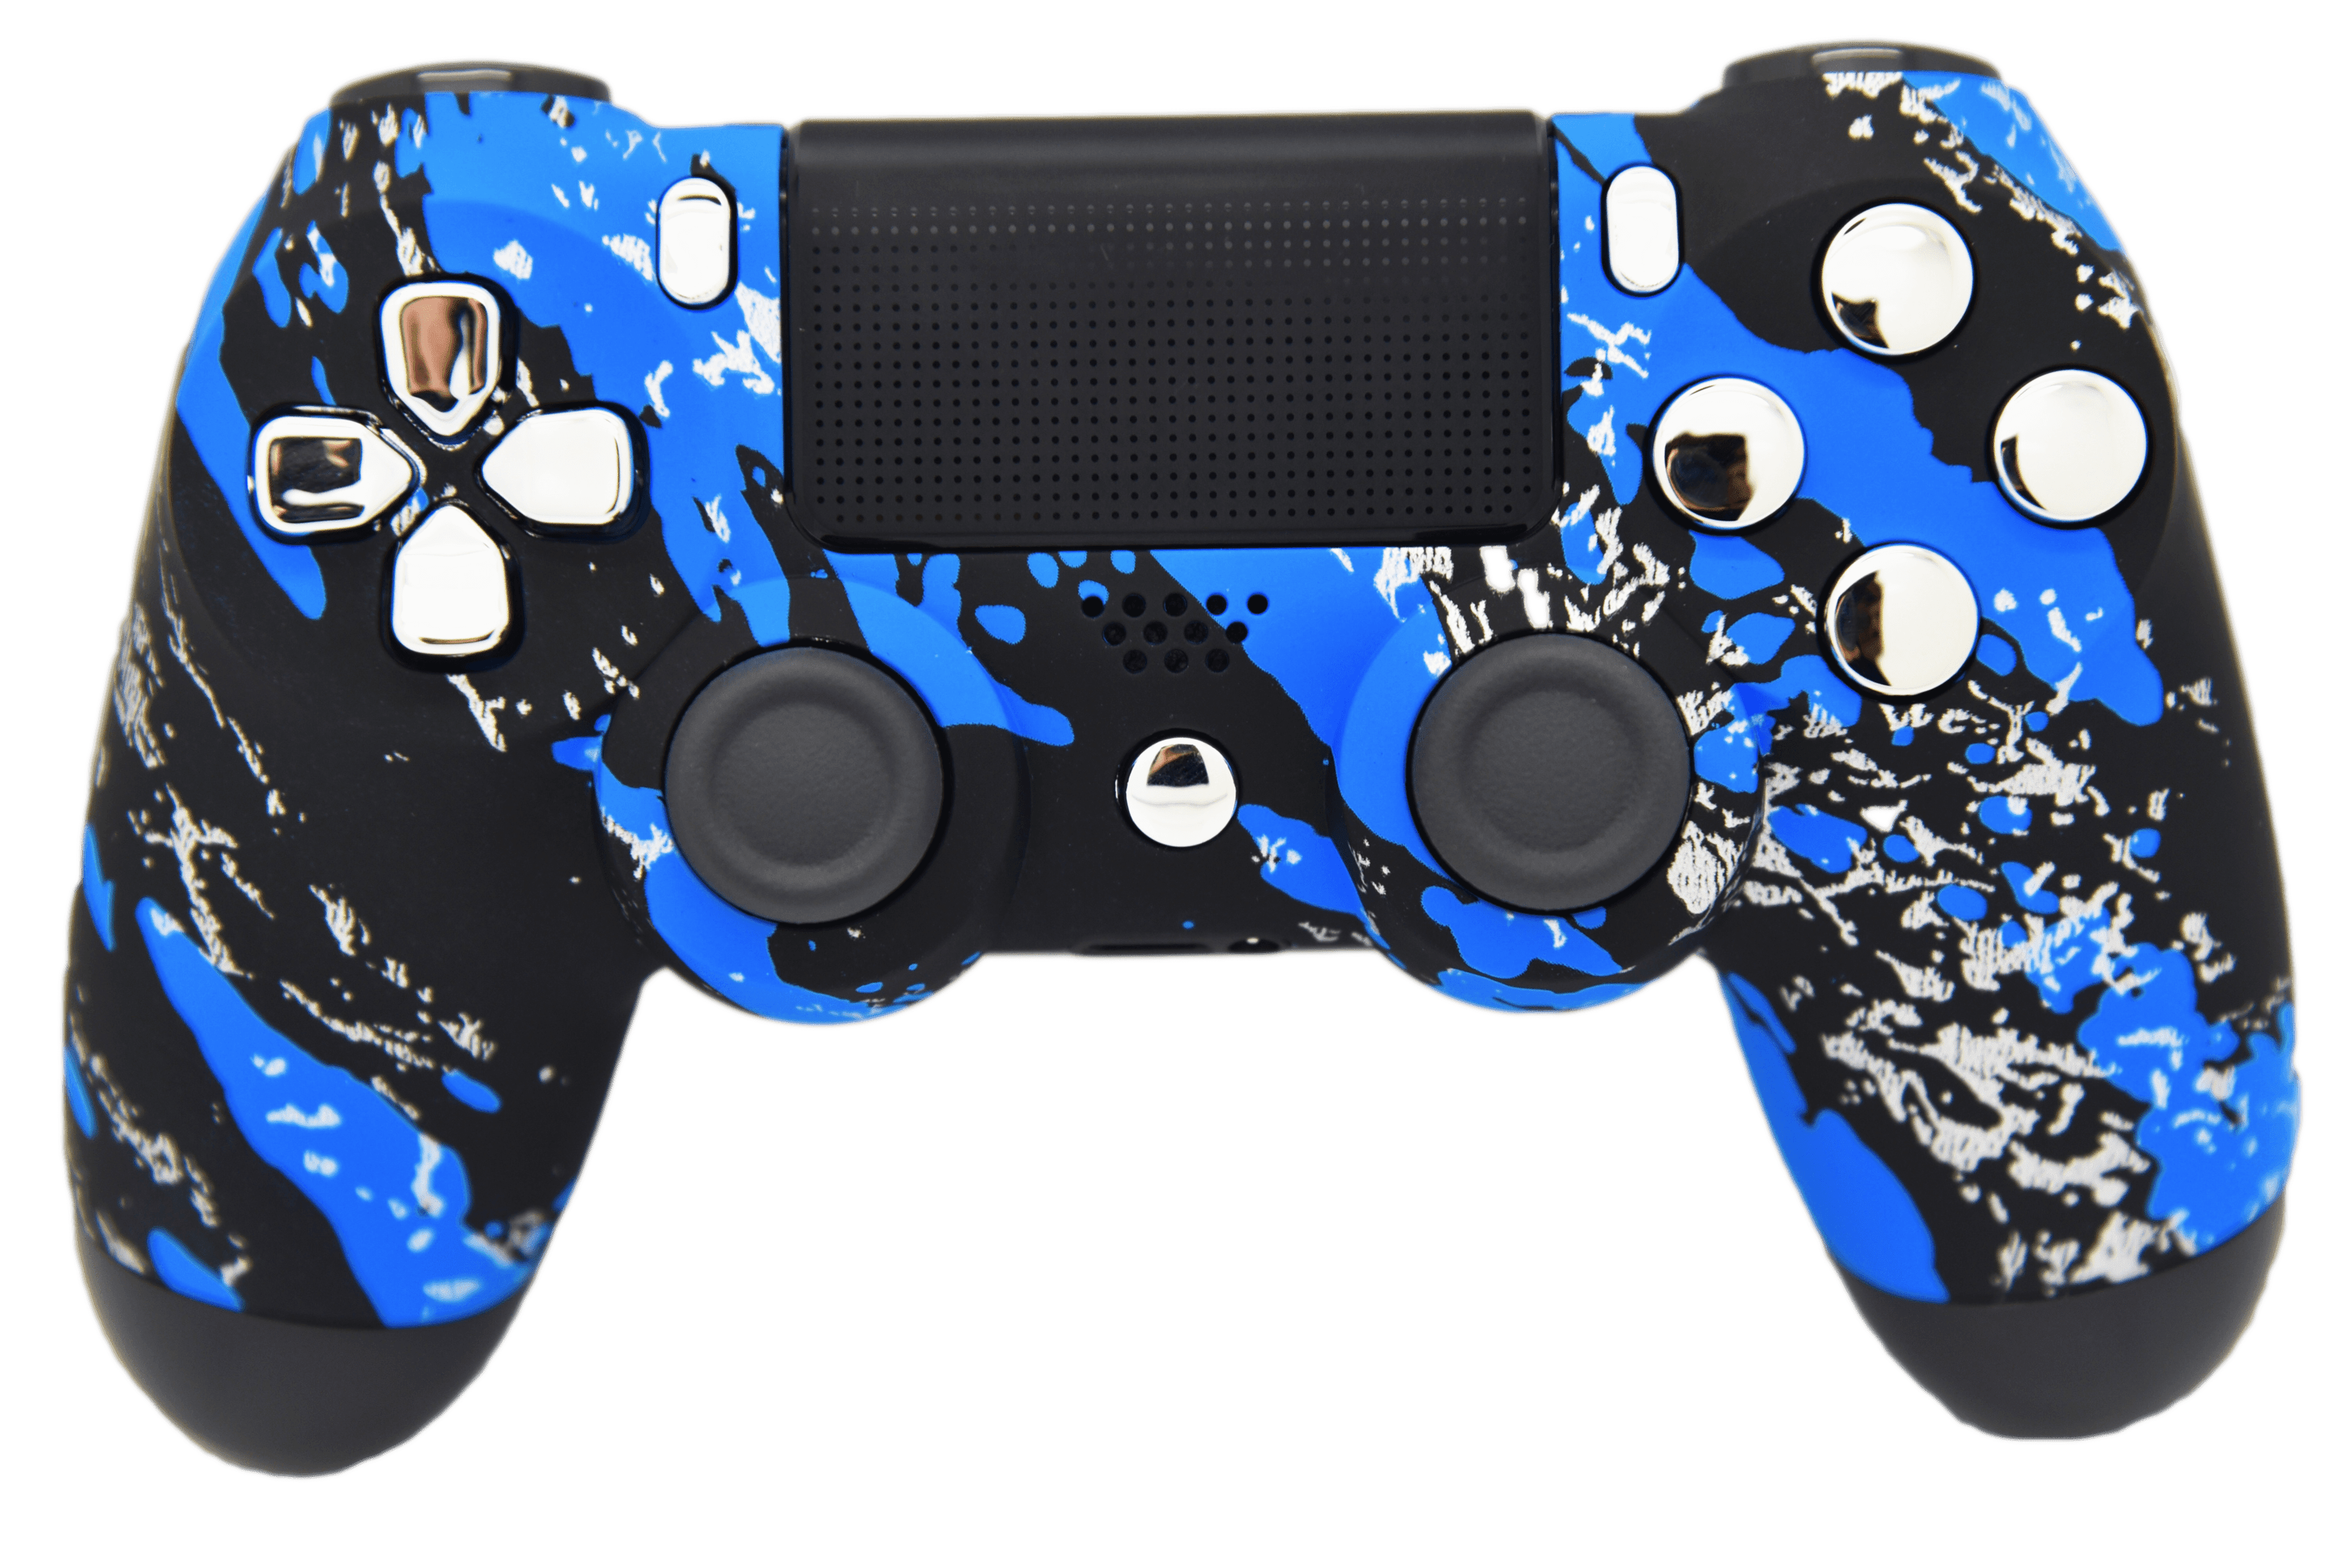 Sony PLAYSTATION 4 Controller PNG. Джойстик ps4 Рапид. Dualshock 4 Cod. PLAYSTATION 4 Joystick PNG. Ps4 джойстик android